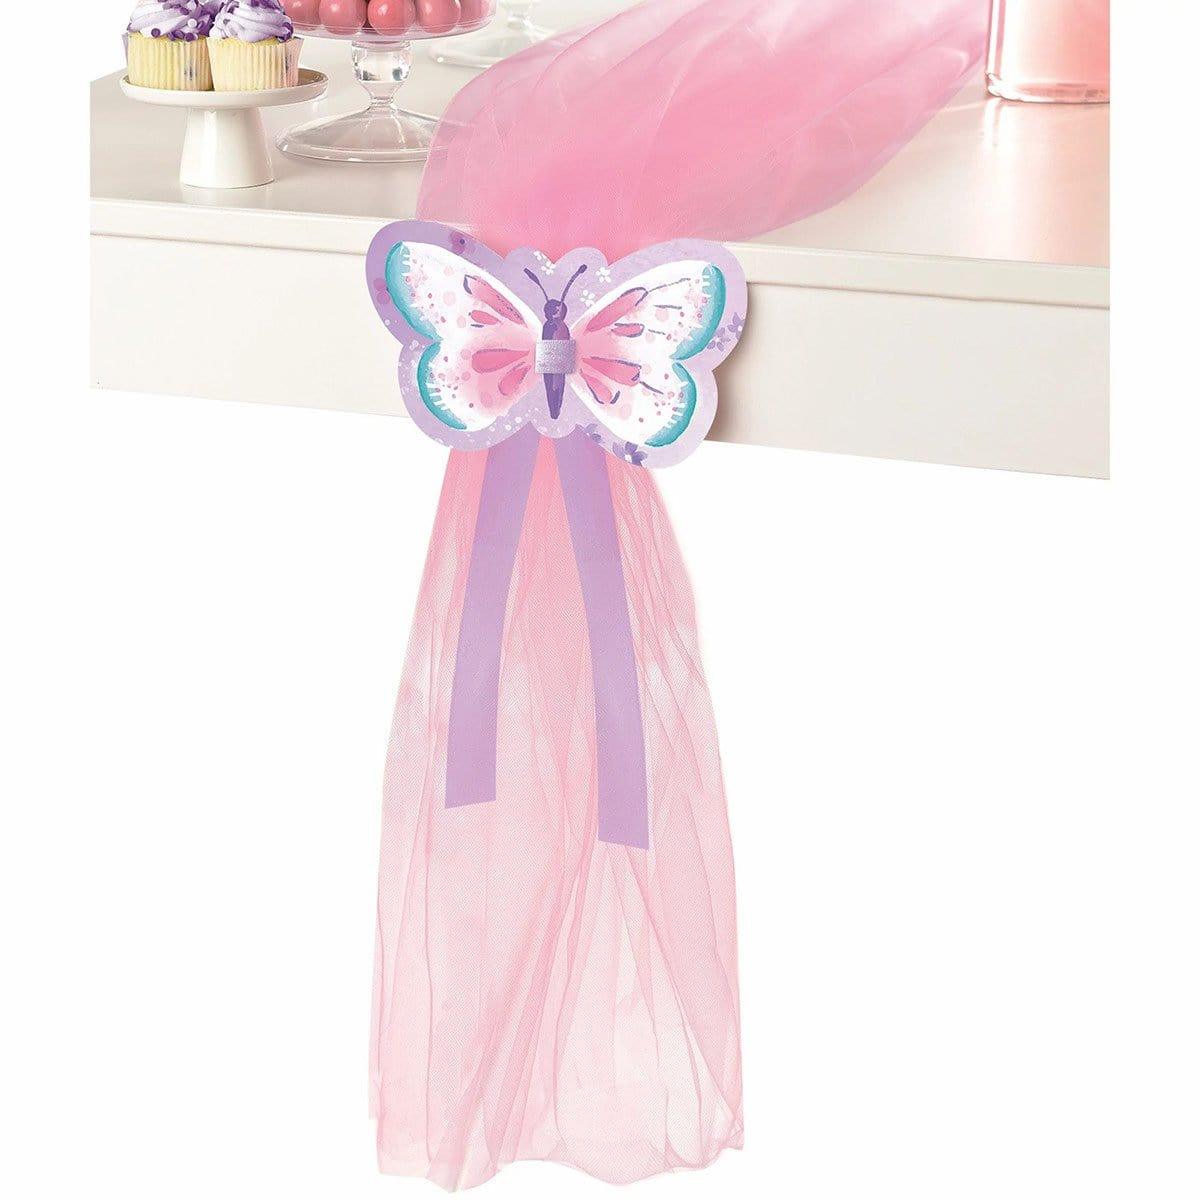 Buy Kids Birthday Flutter Party Table Runner Decoration Kit sold at Party Expert